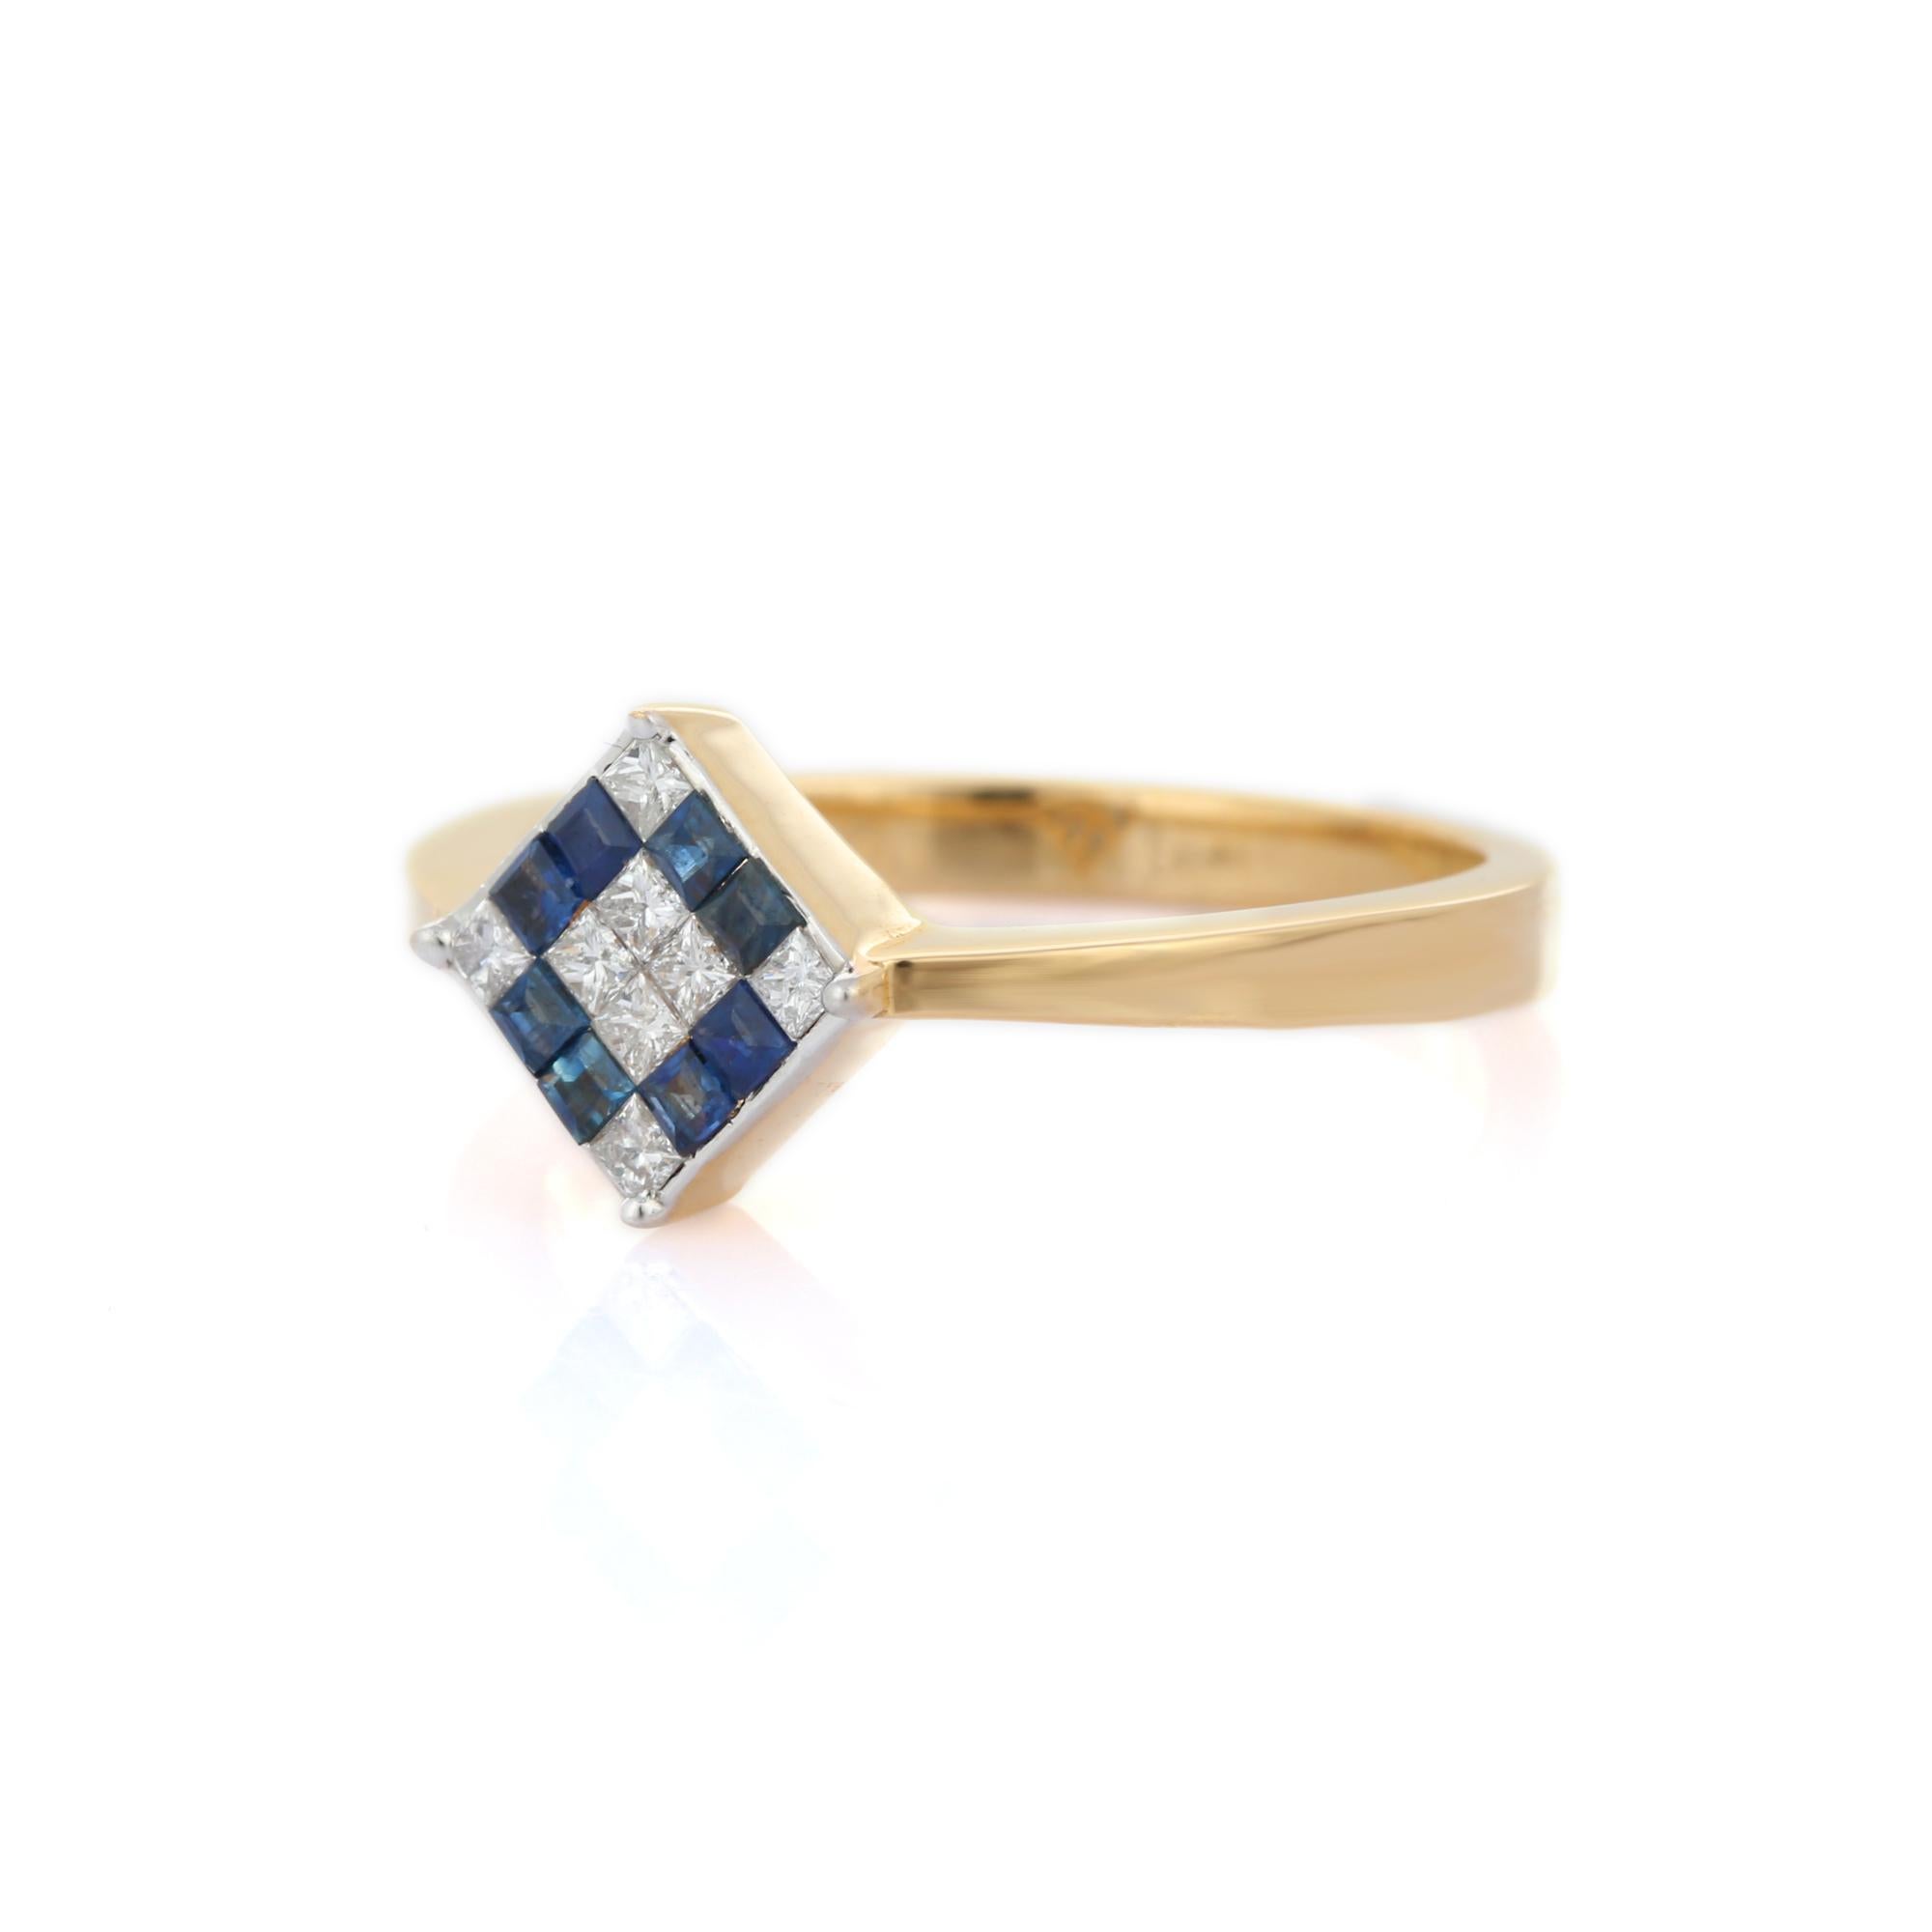 For Sale:  Blue Sapphire and Diamond Square Ring Studded in 18k Solid Yellow Gold  3